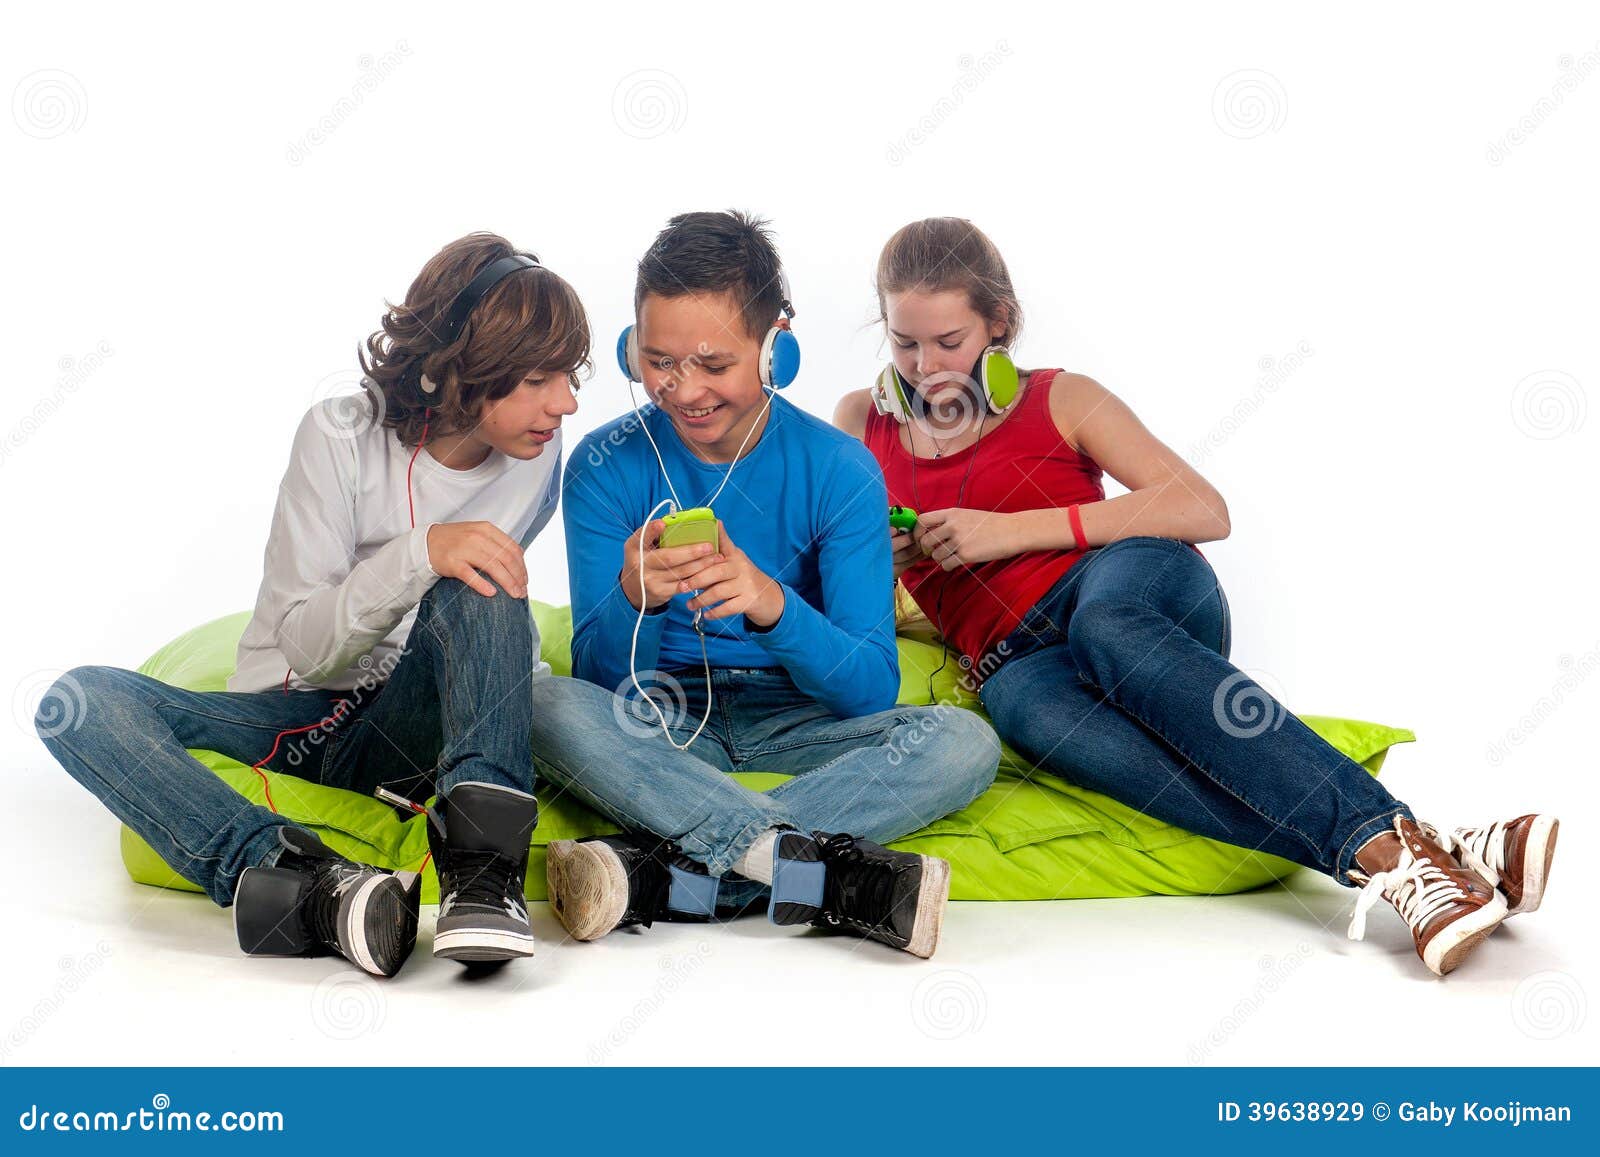 chilling teenagers